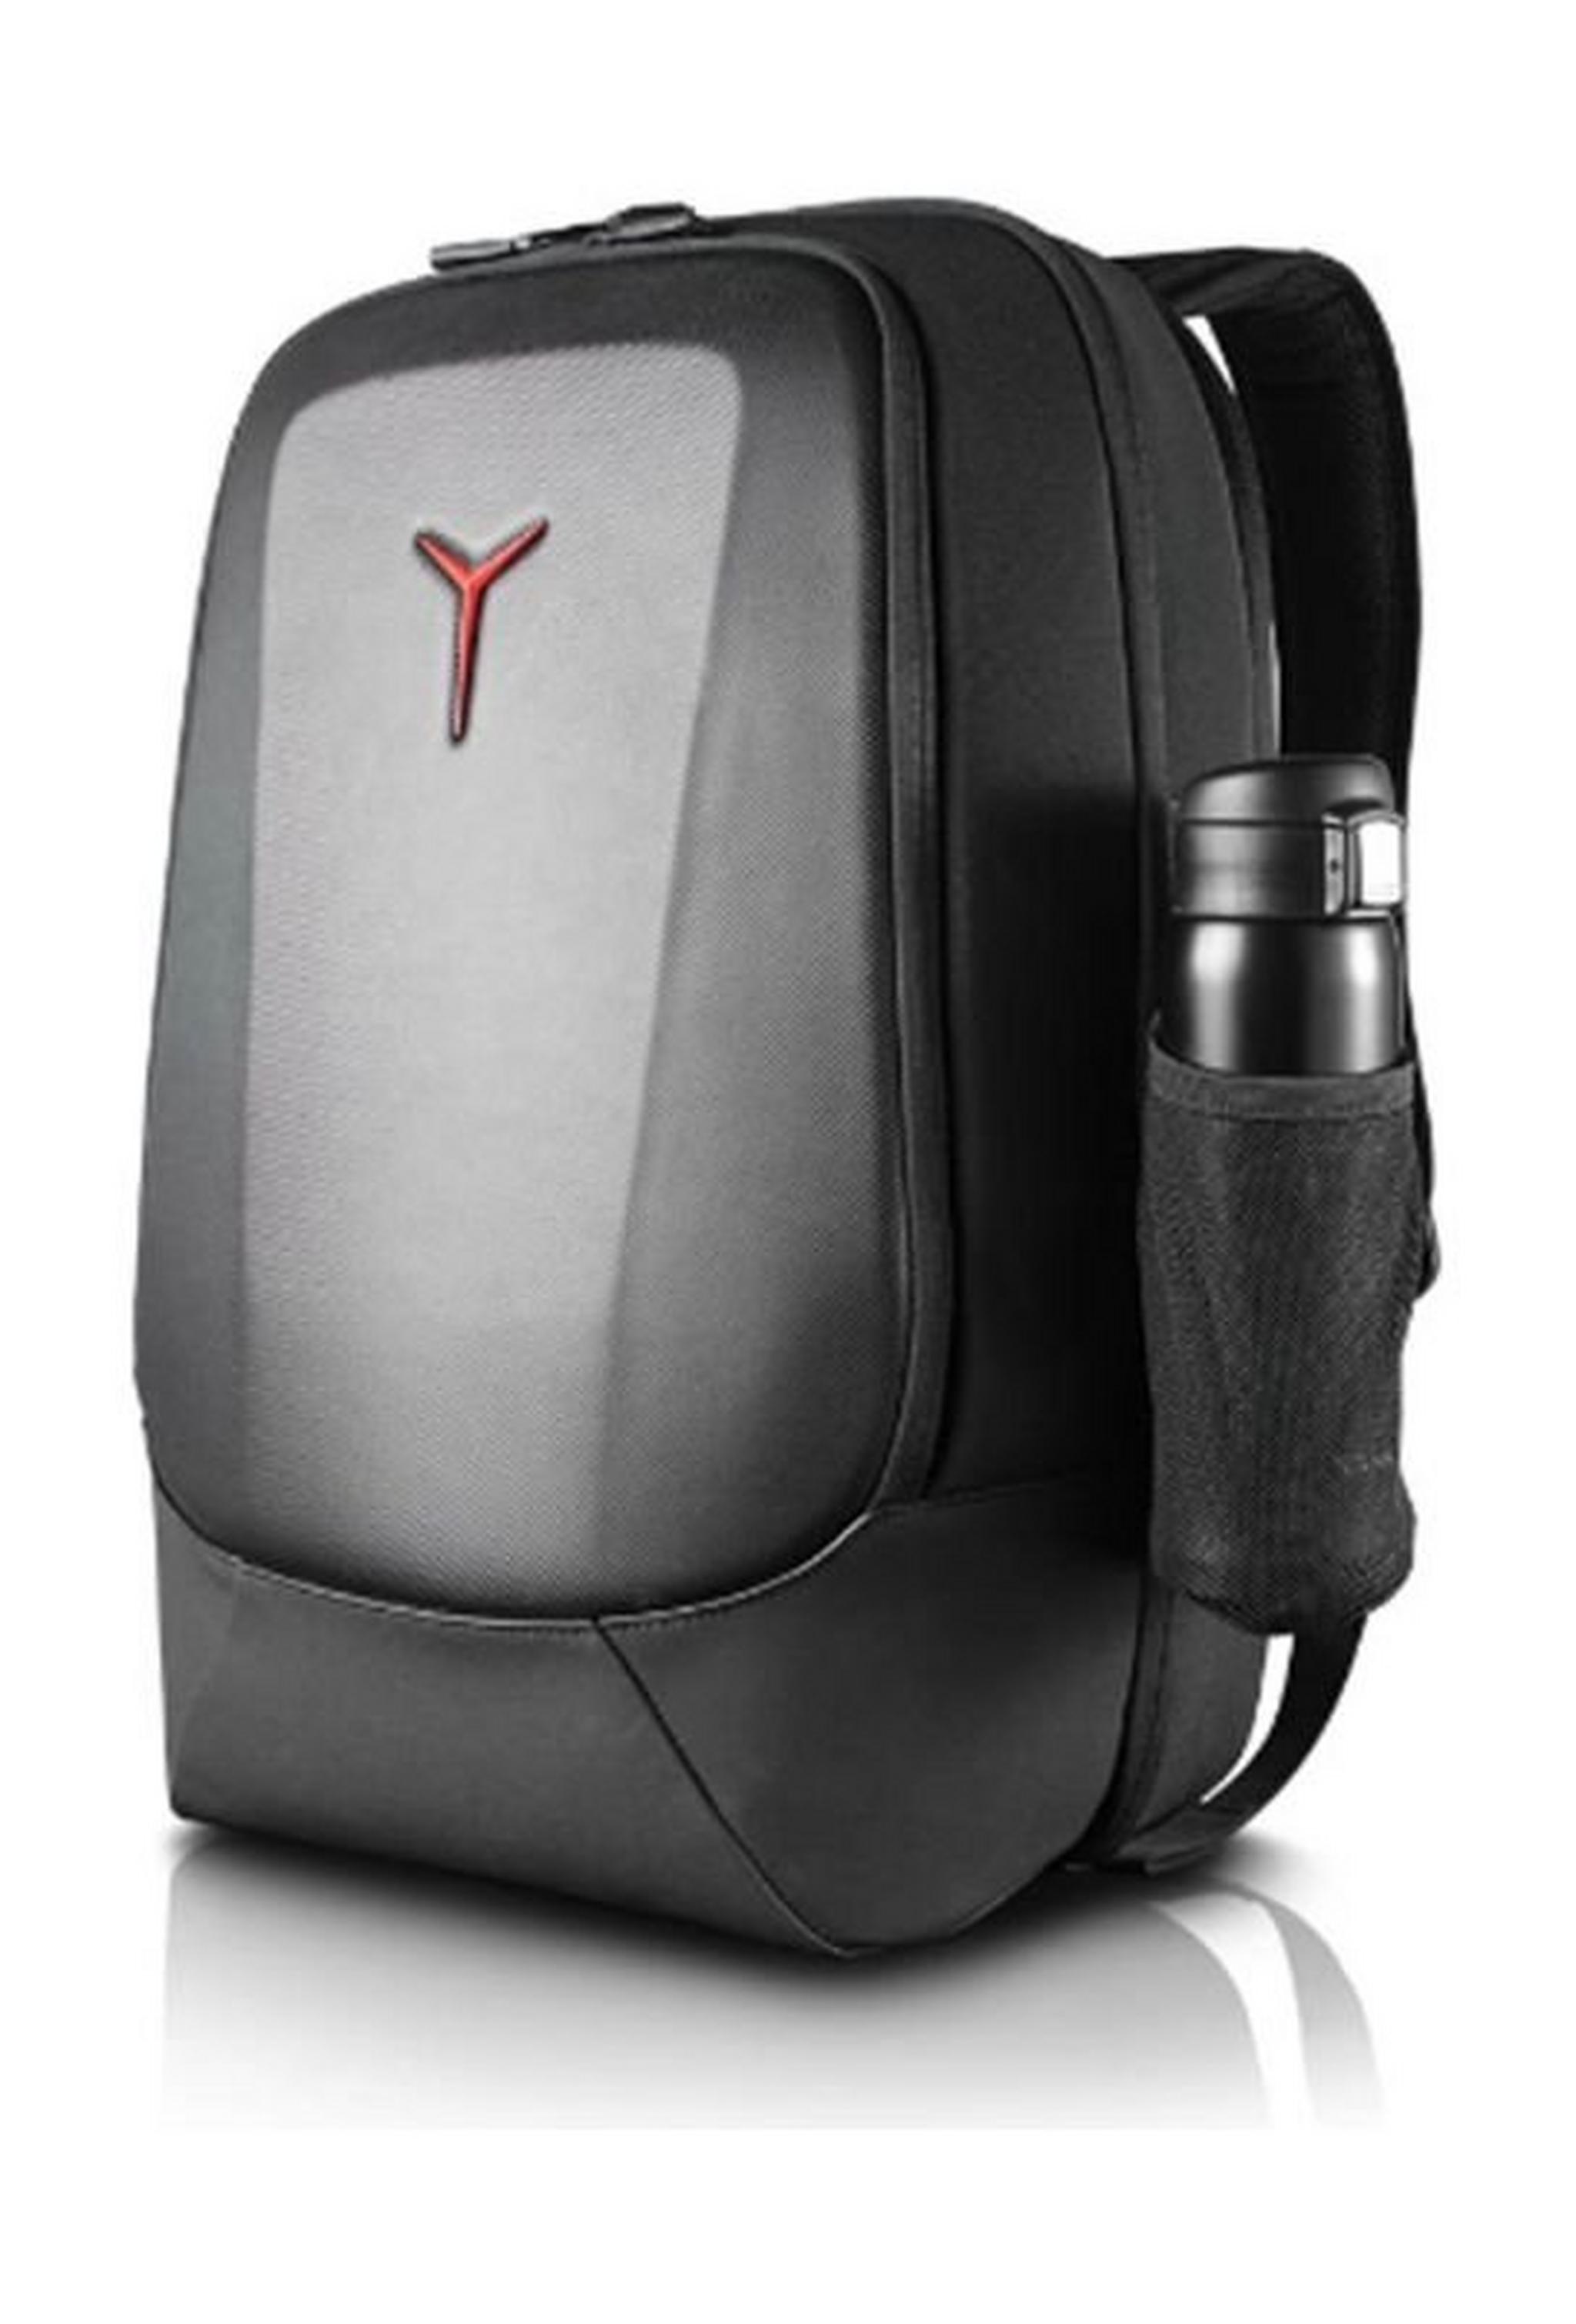 Lenovo Y Gaming Armored Backpack - B8270